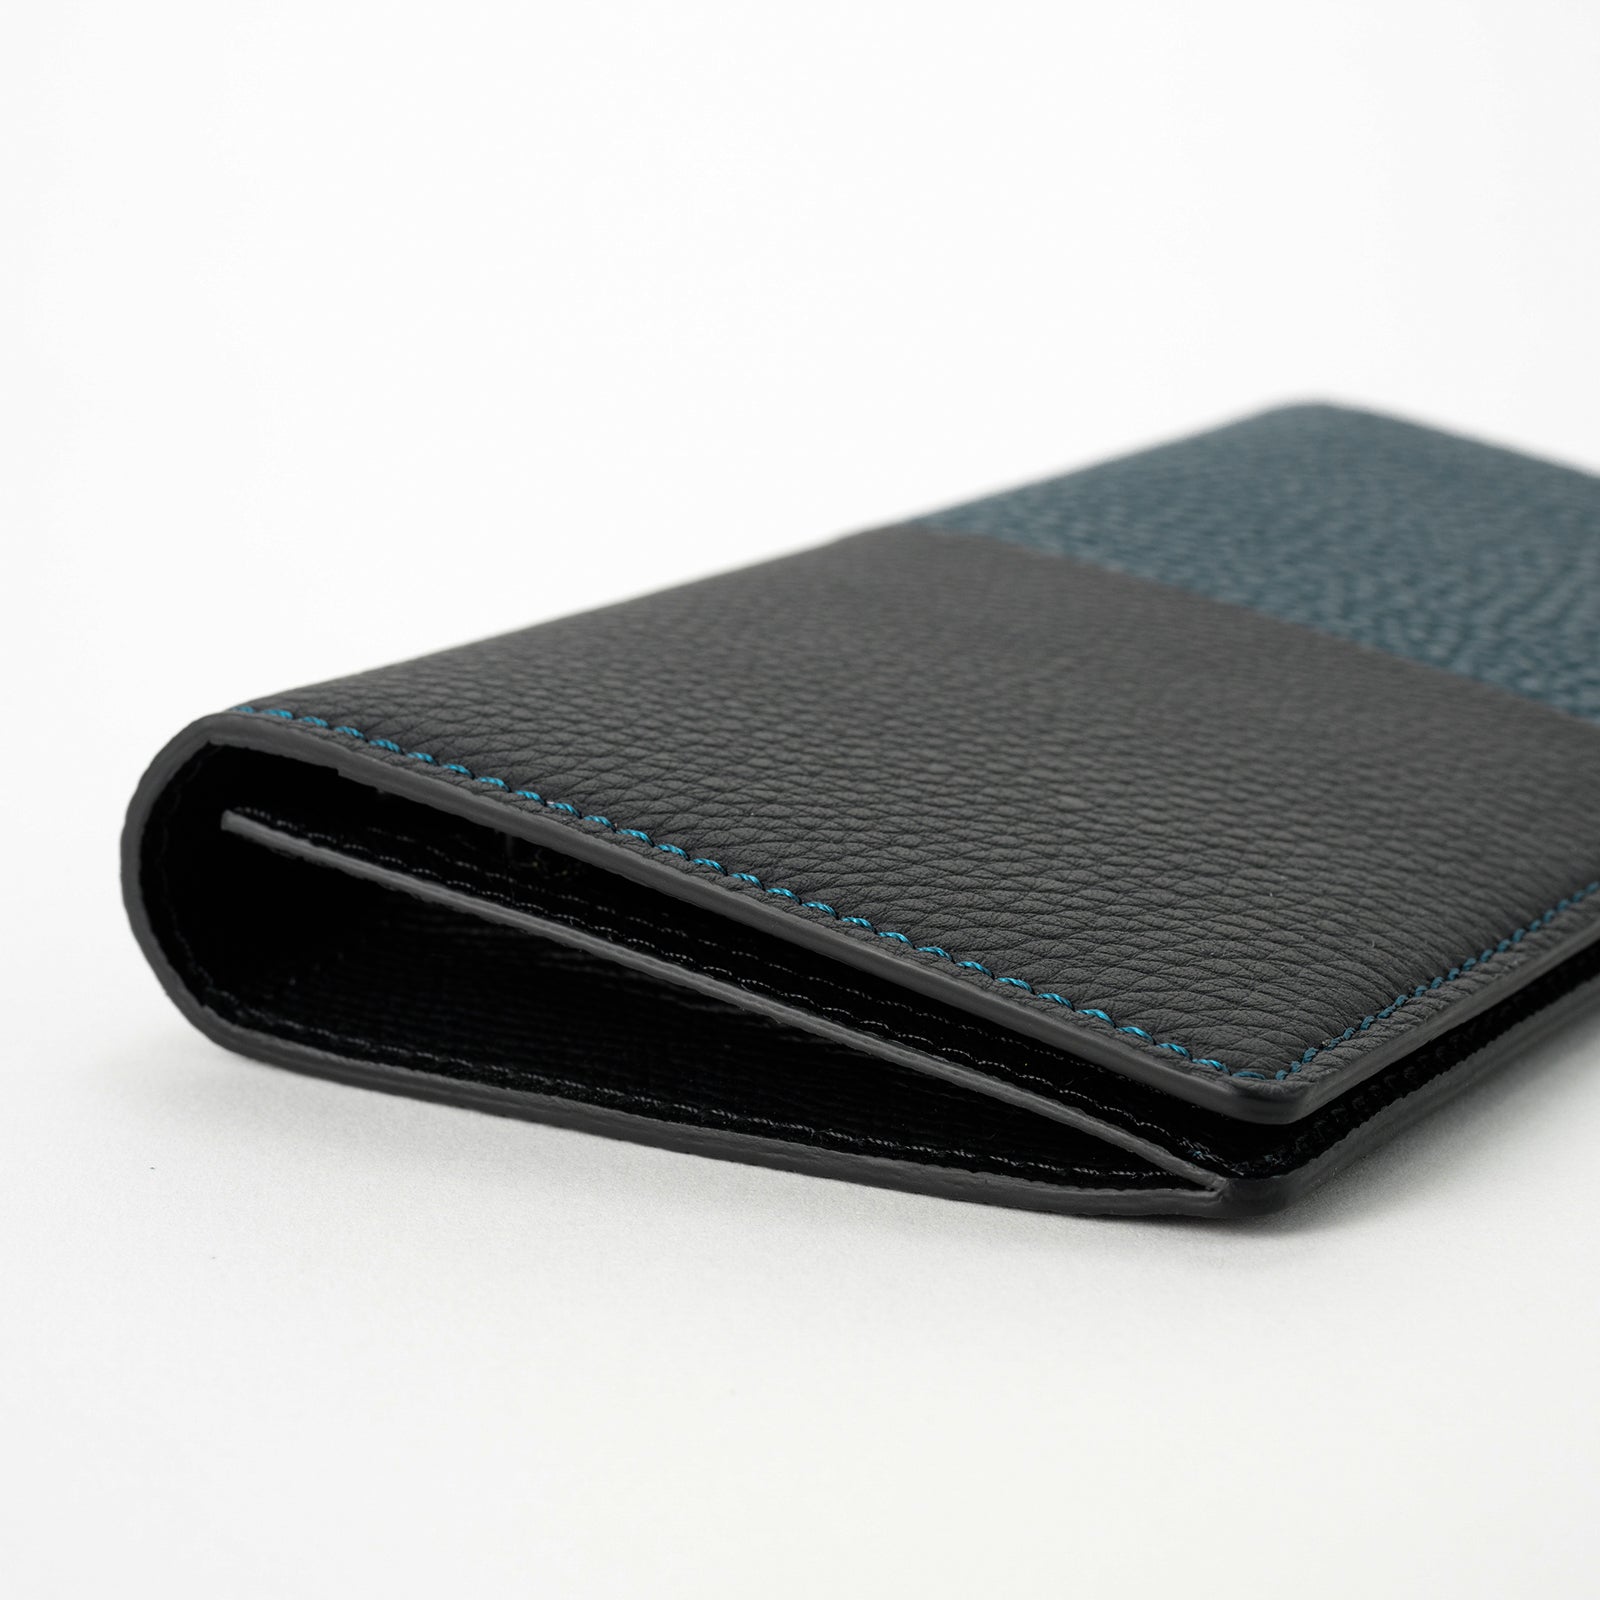 Bicolor bamboo gusset long wallet Togo leather